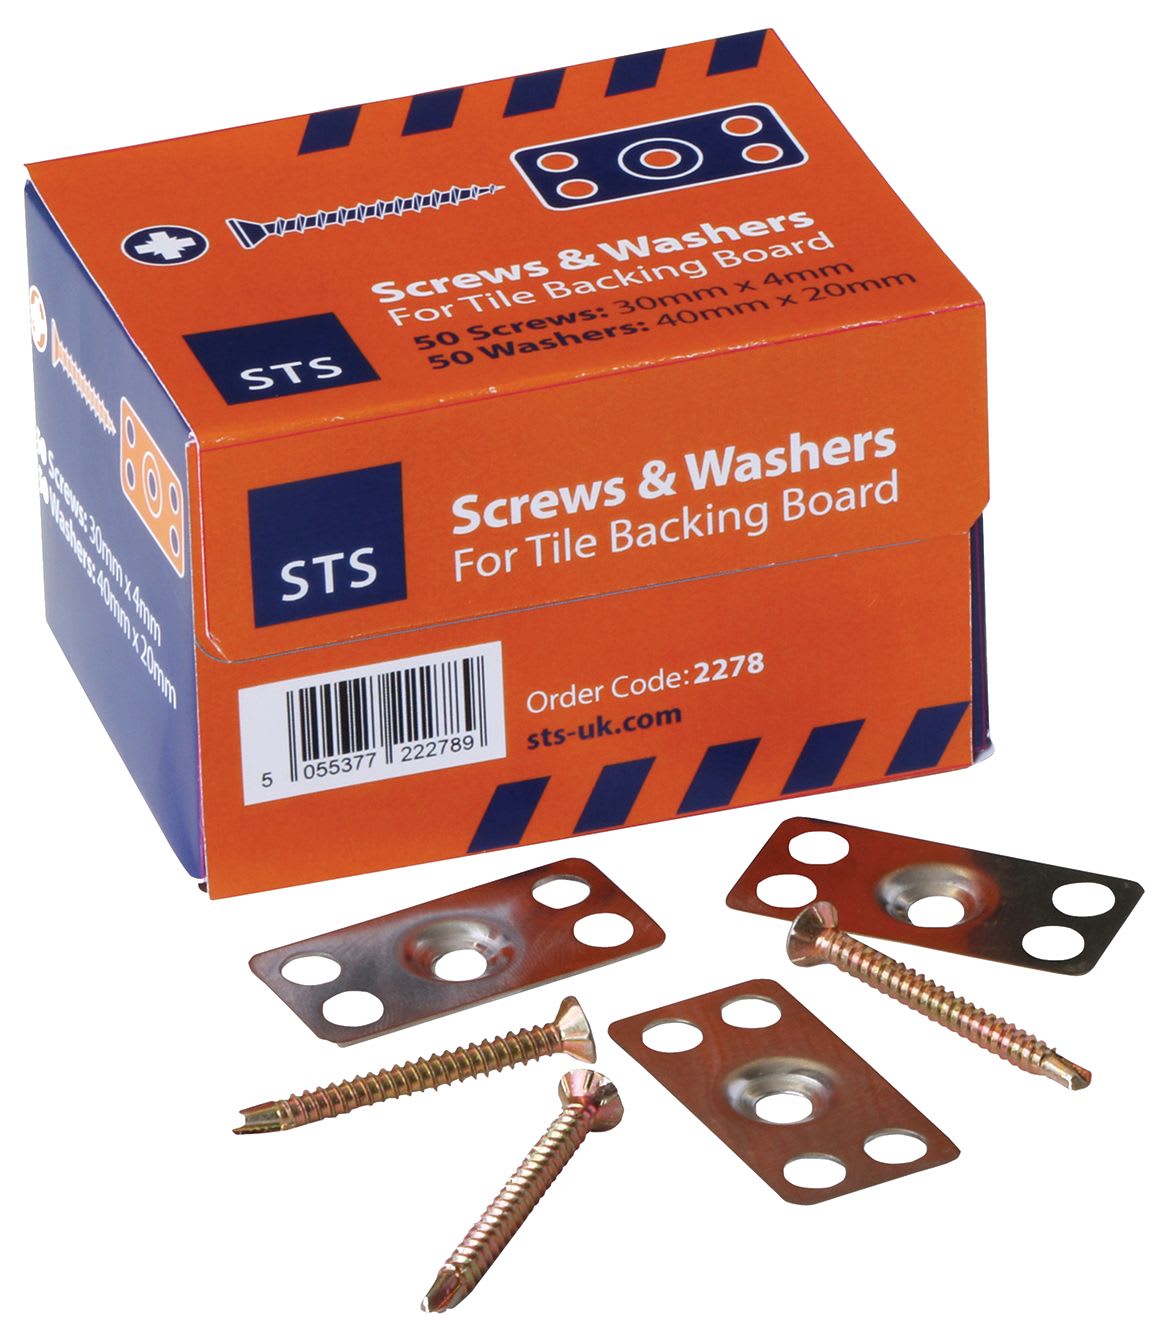 STS 30mm Screws and Stainless Steel Washers –